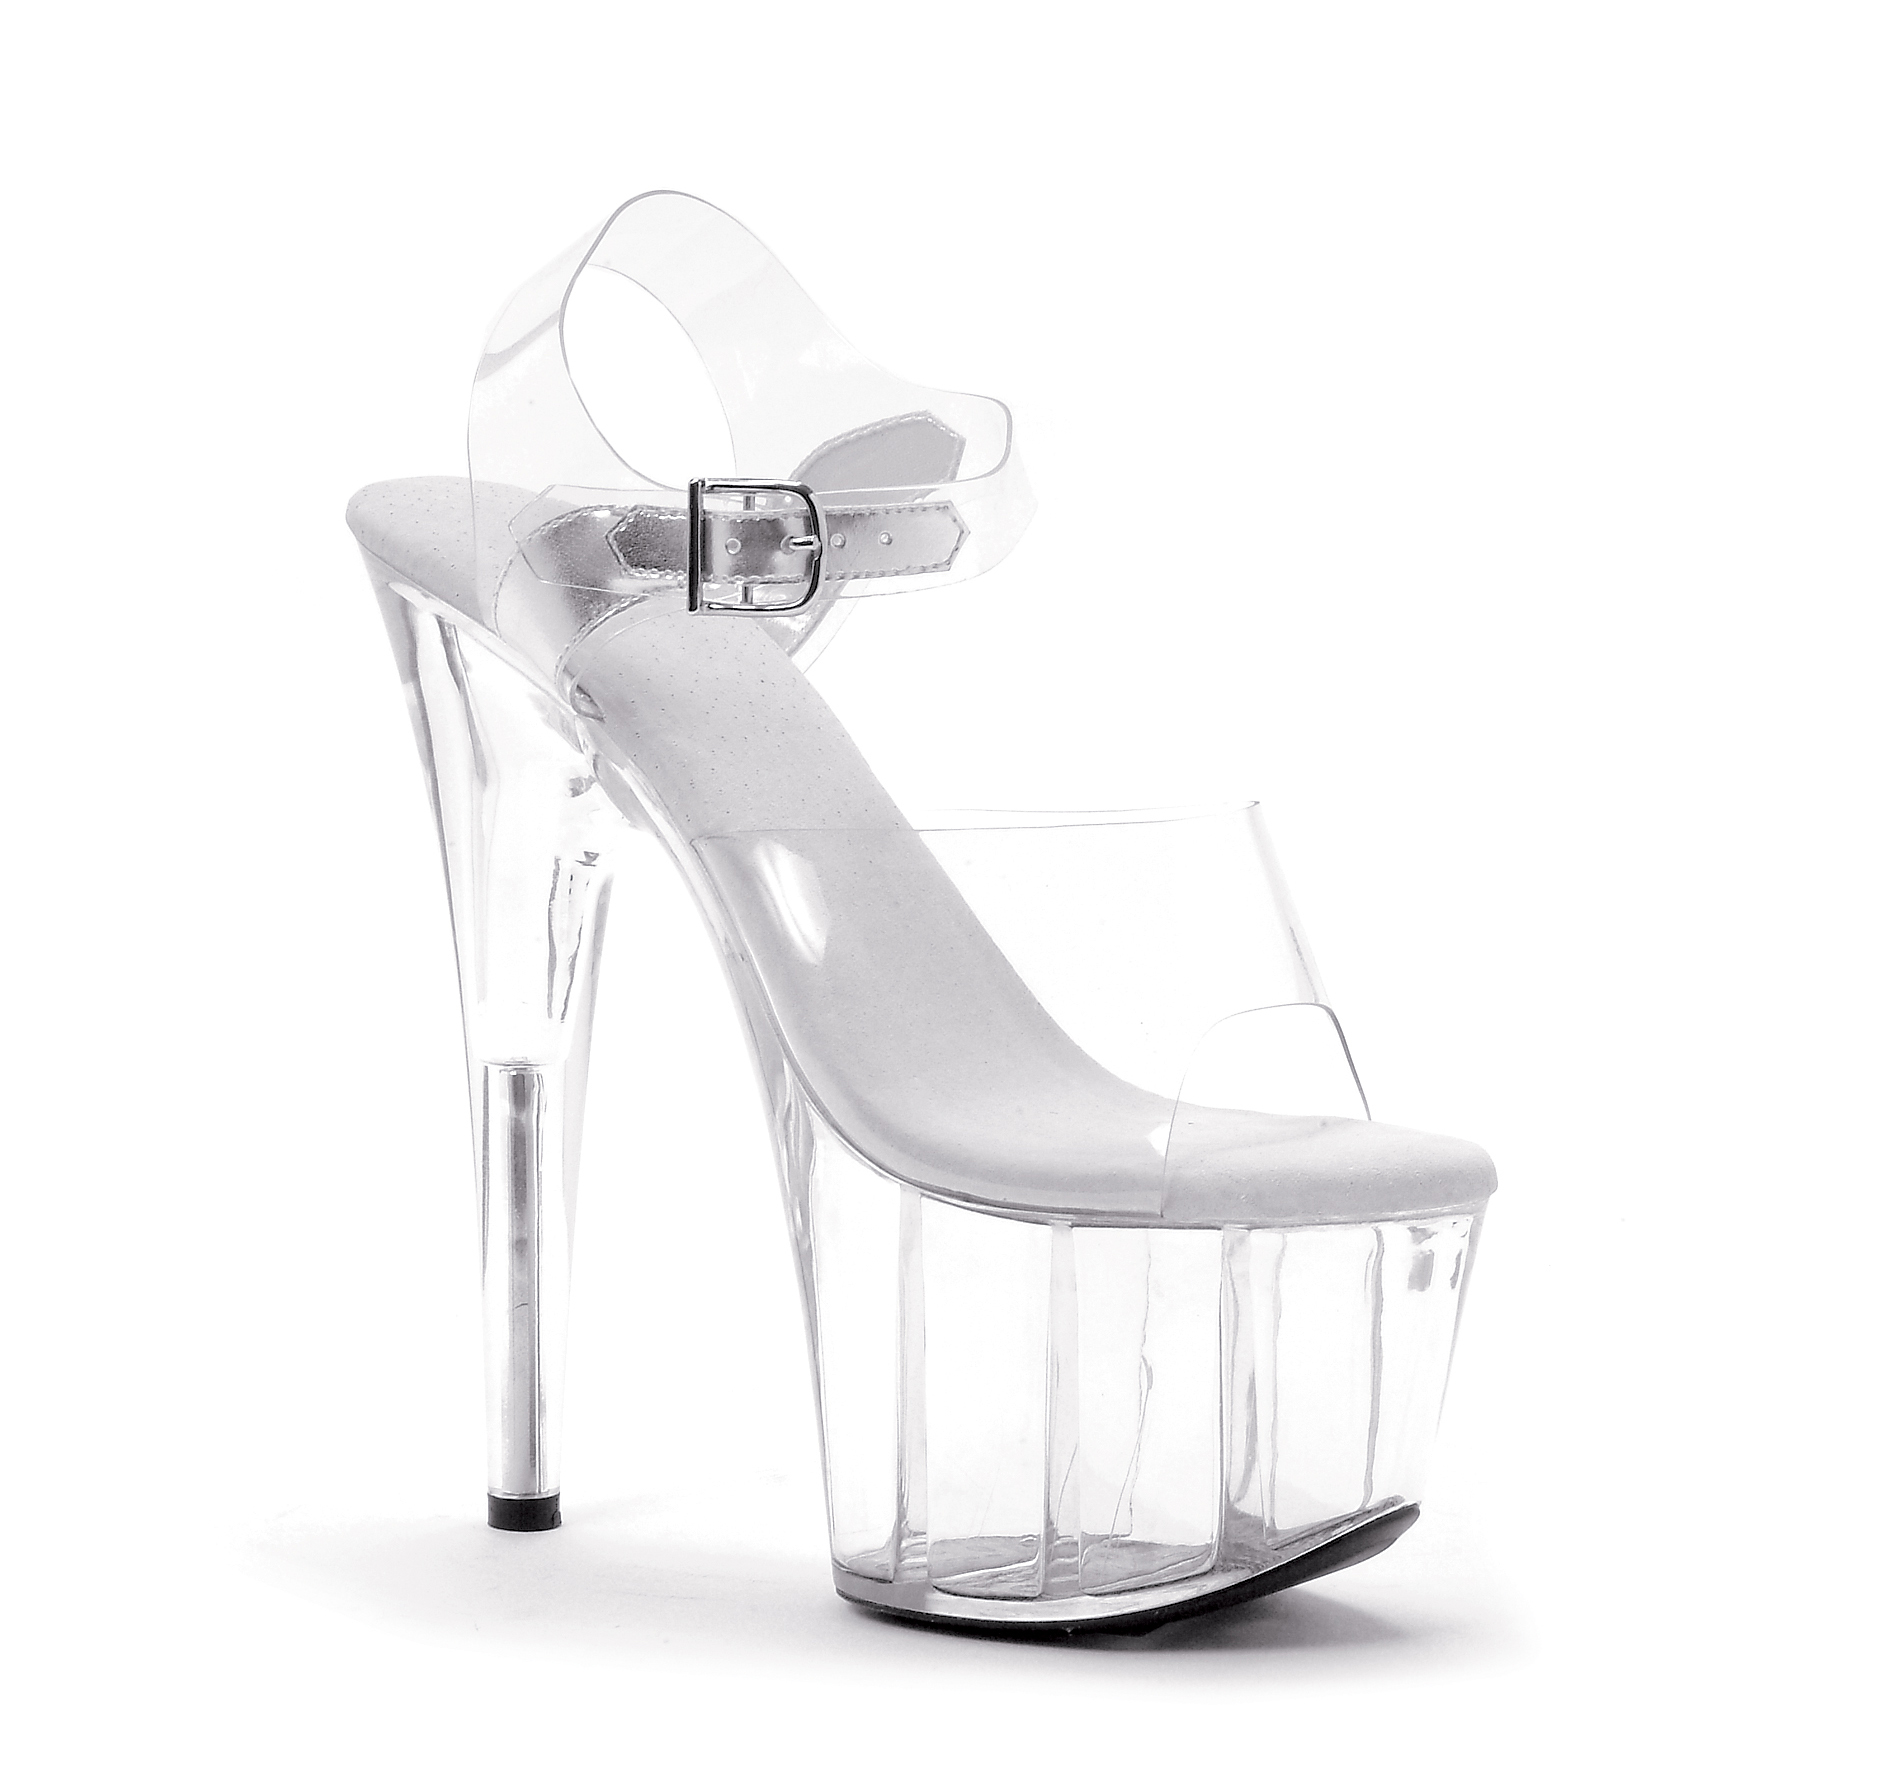 Brook - 7 Inch Pointed Stiletto Sandal